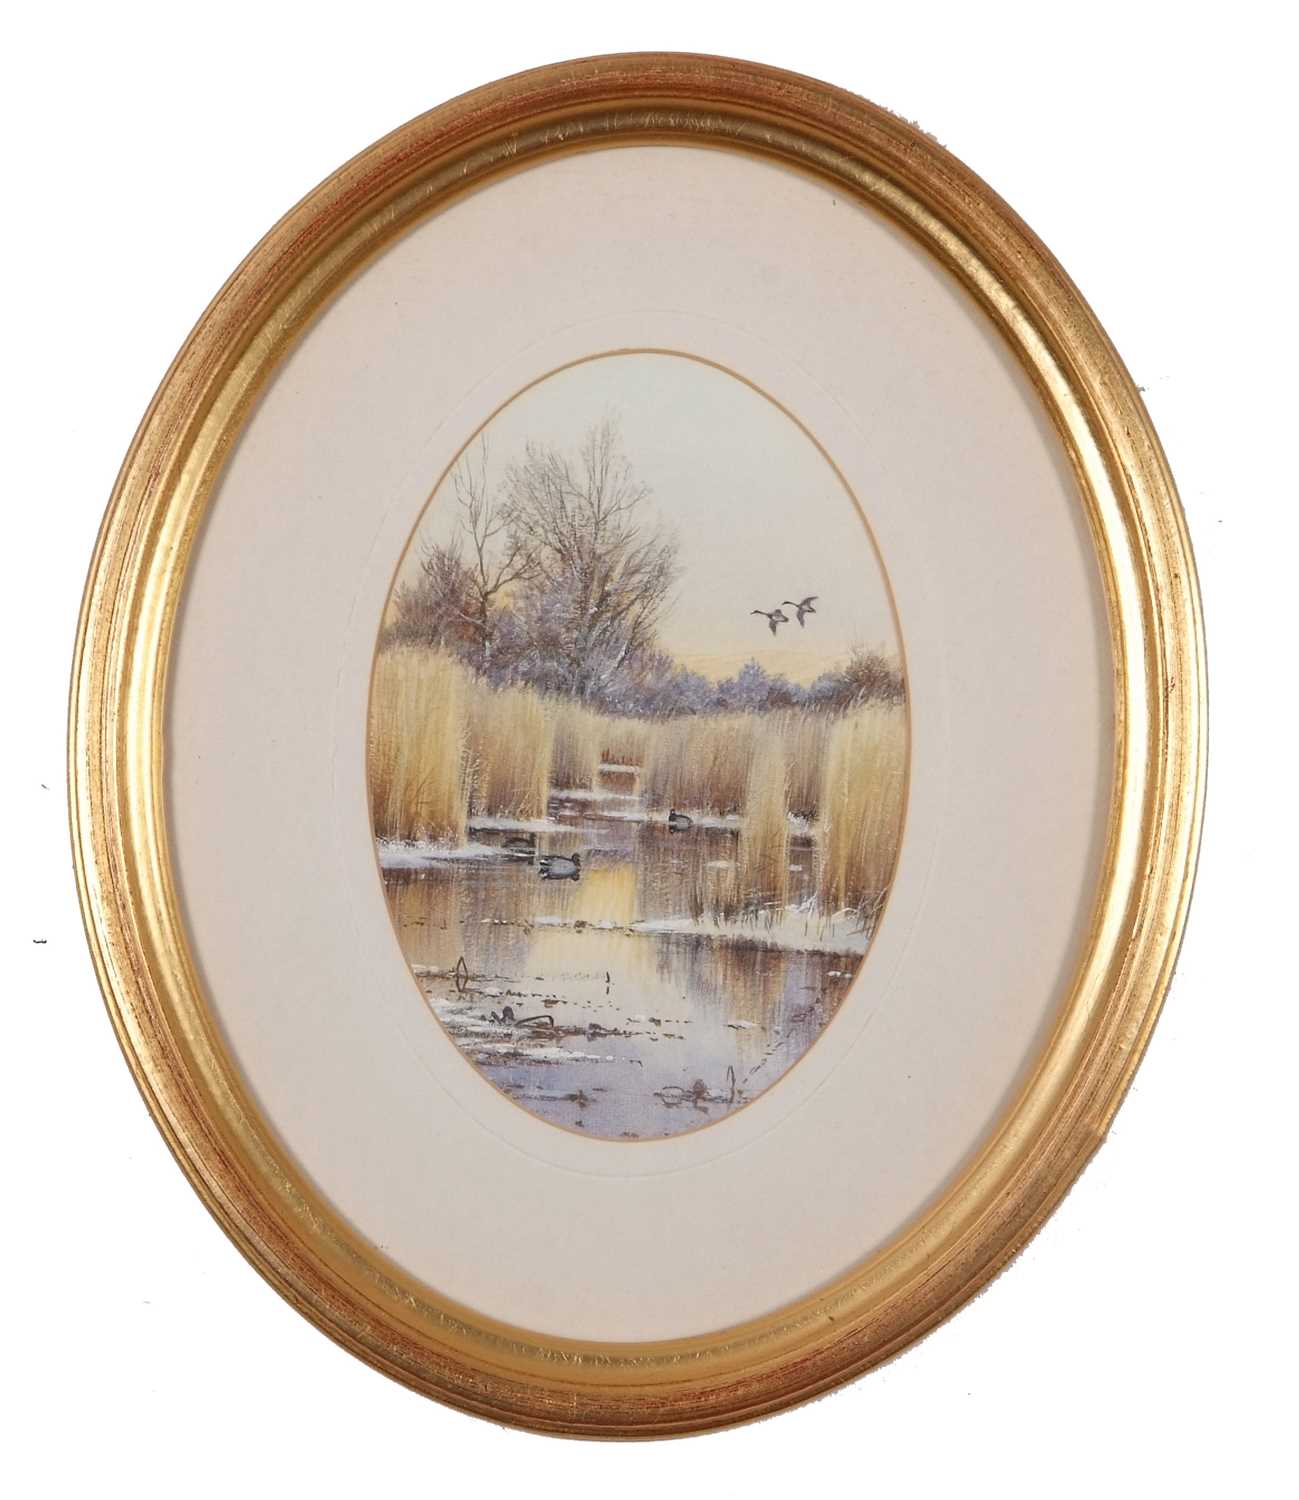 Colin Burns (British, b.1944), "Strumpshaw", watercolour in oval, signed,11x15cm, framed. - Image 2 of 3